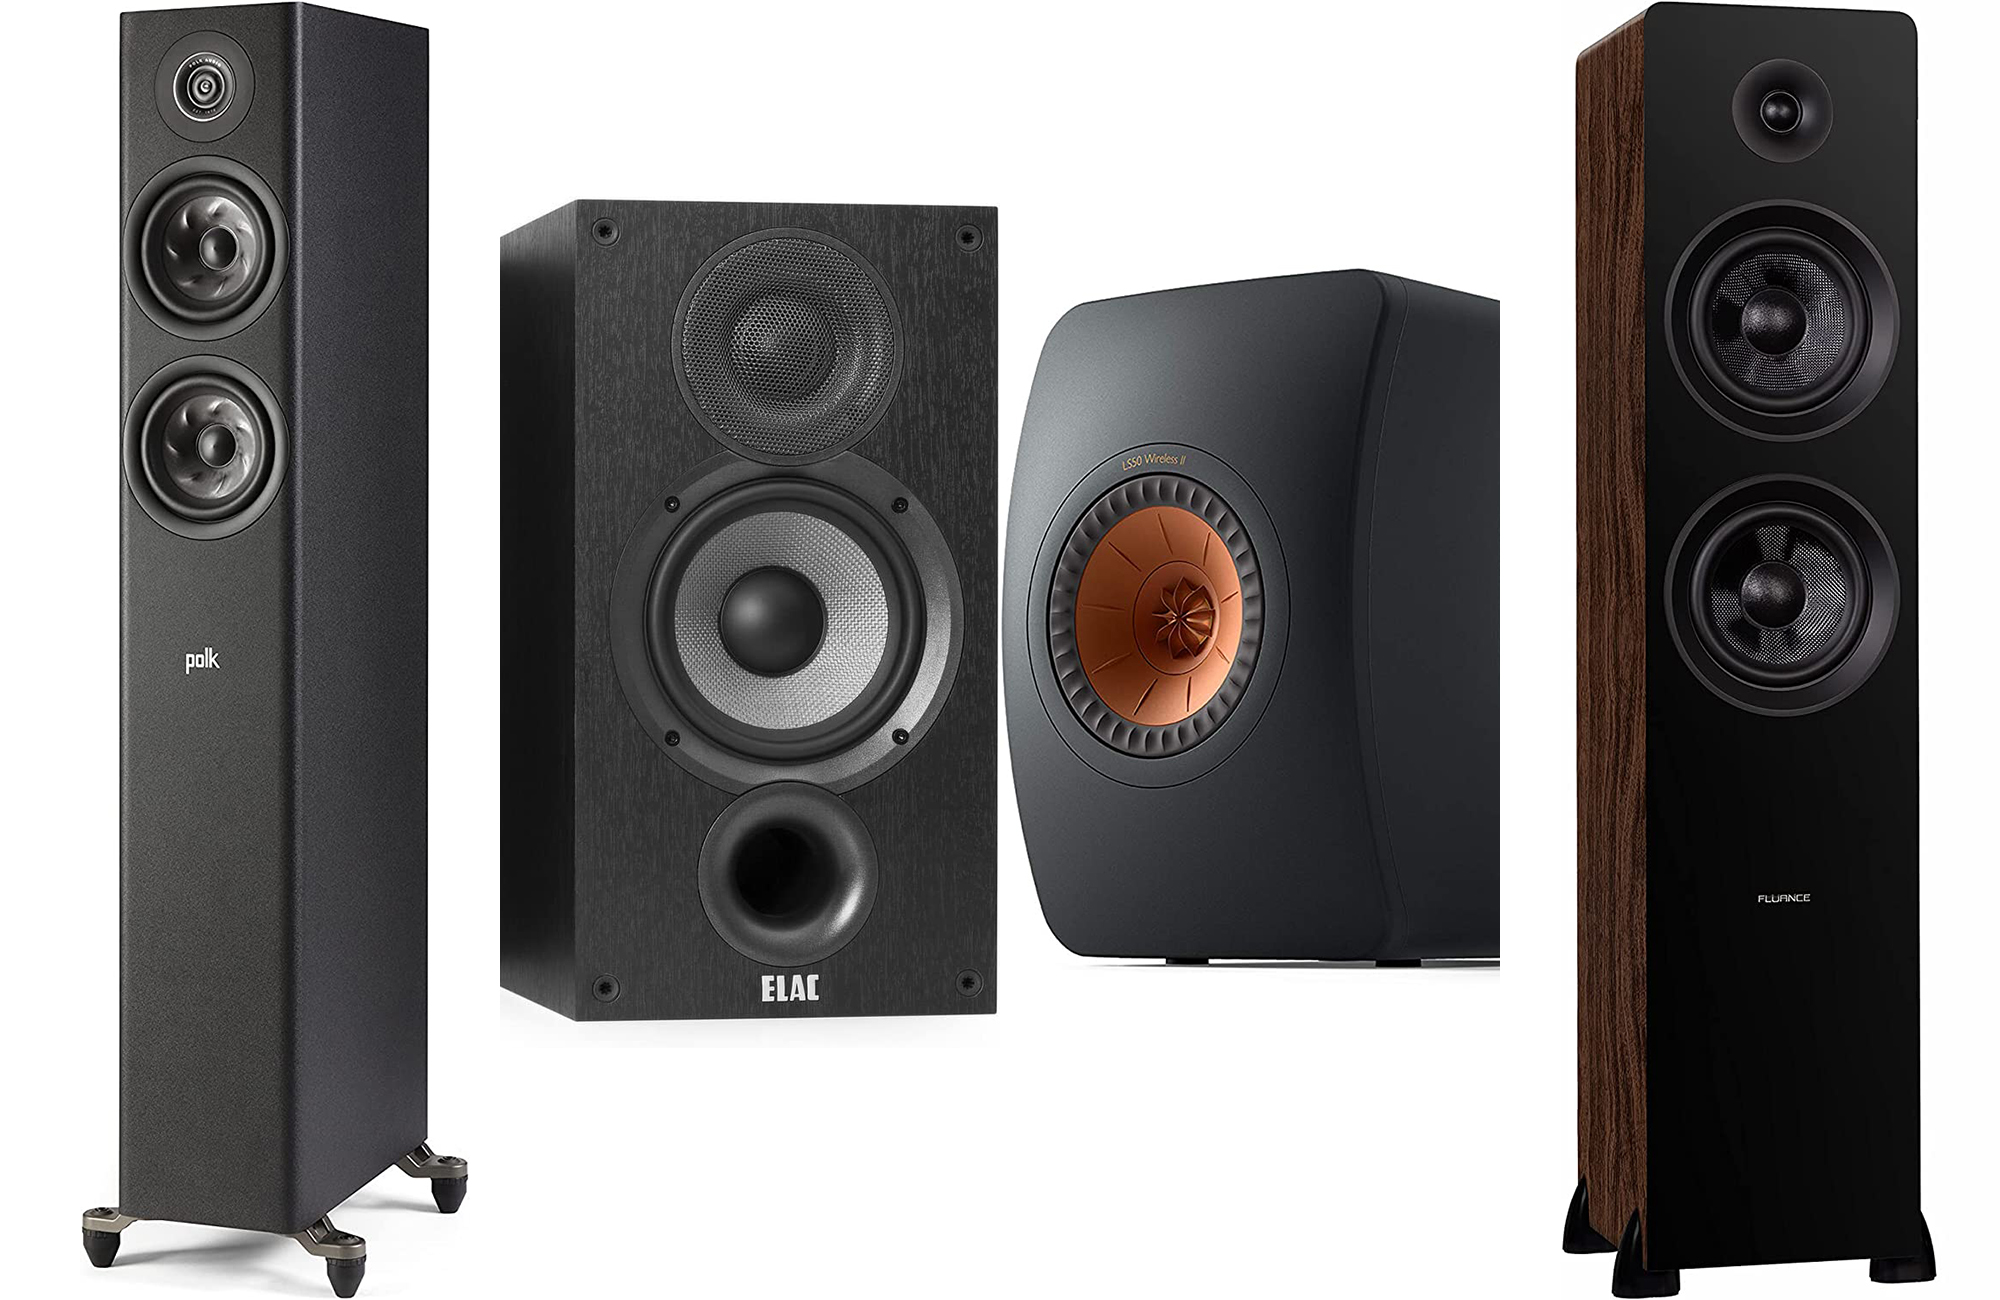 Best budget computer speakers: $100 or less